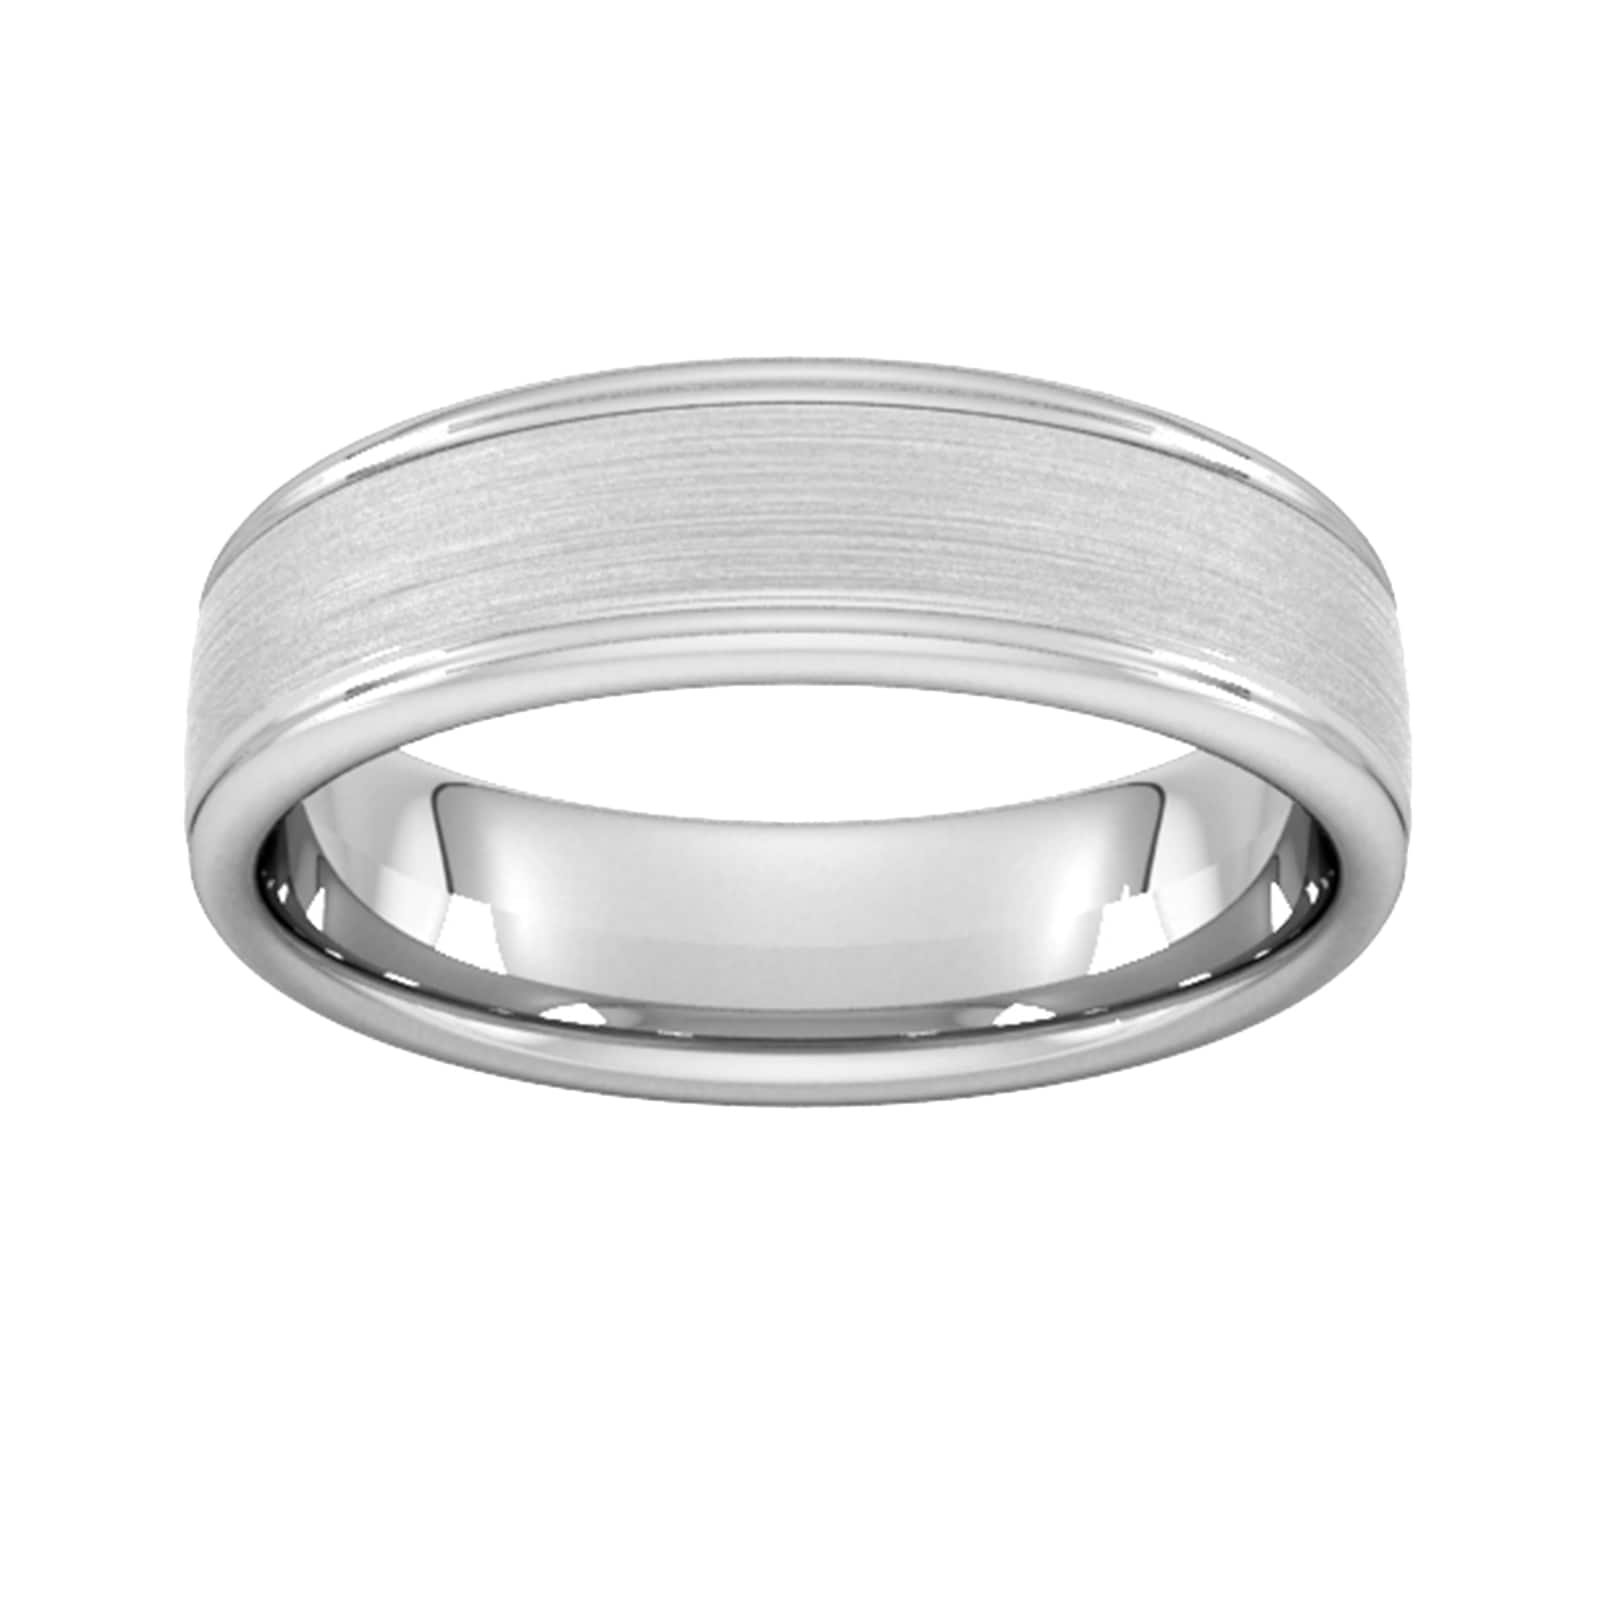 6mm Slight Court Heavy Matt Centre With Grooves Wedding Ring In 9 Carat White Gold - Ring Size U